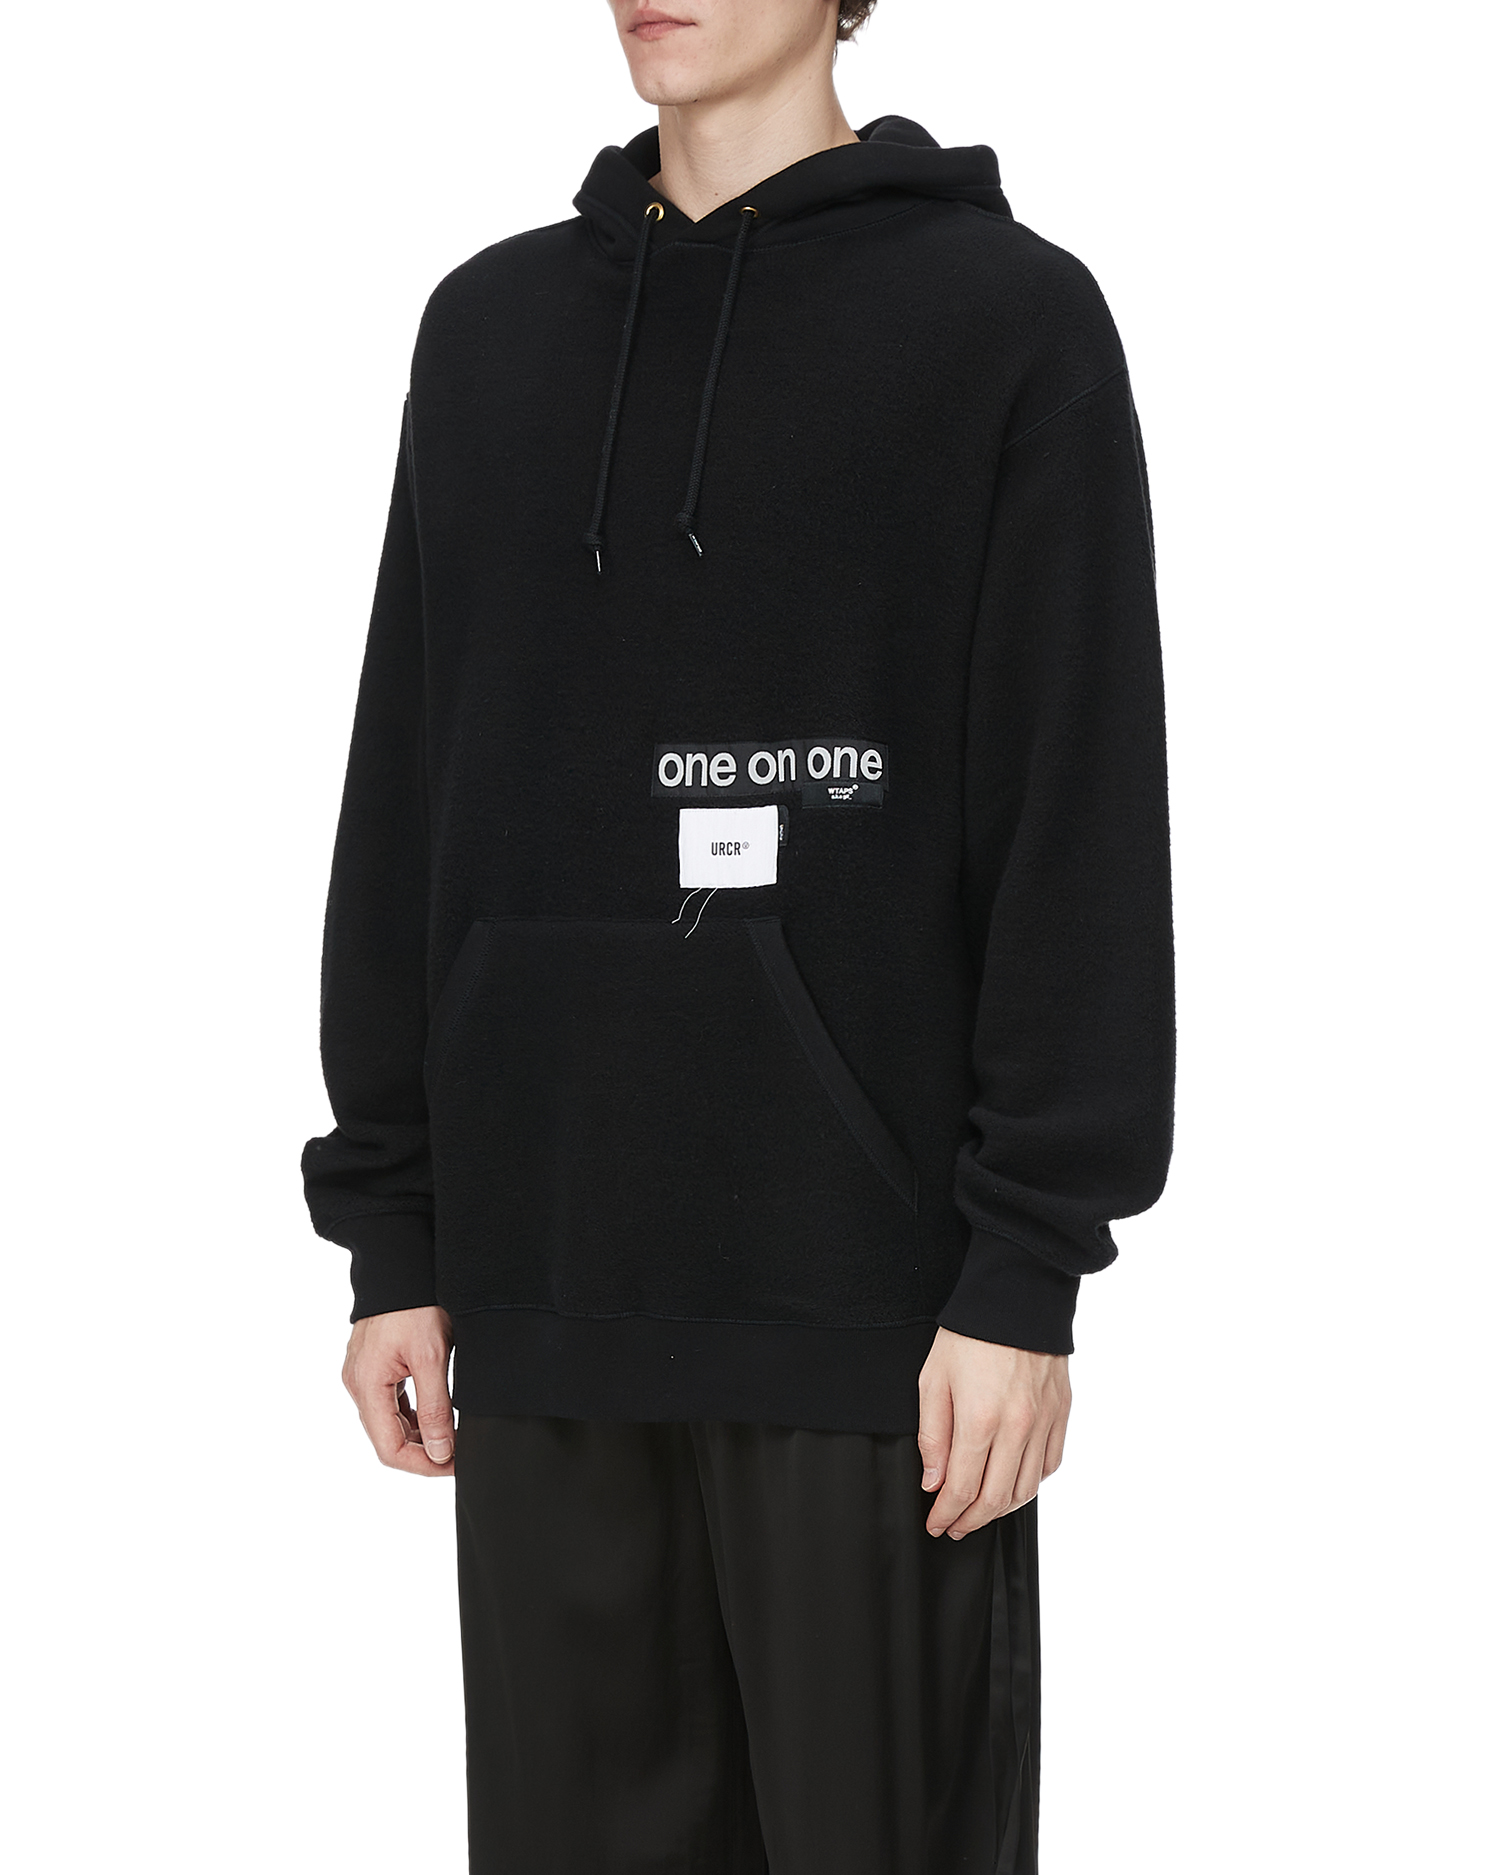 L WTAPS GIG / HOODED / COTTON.UNDERCOVER-